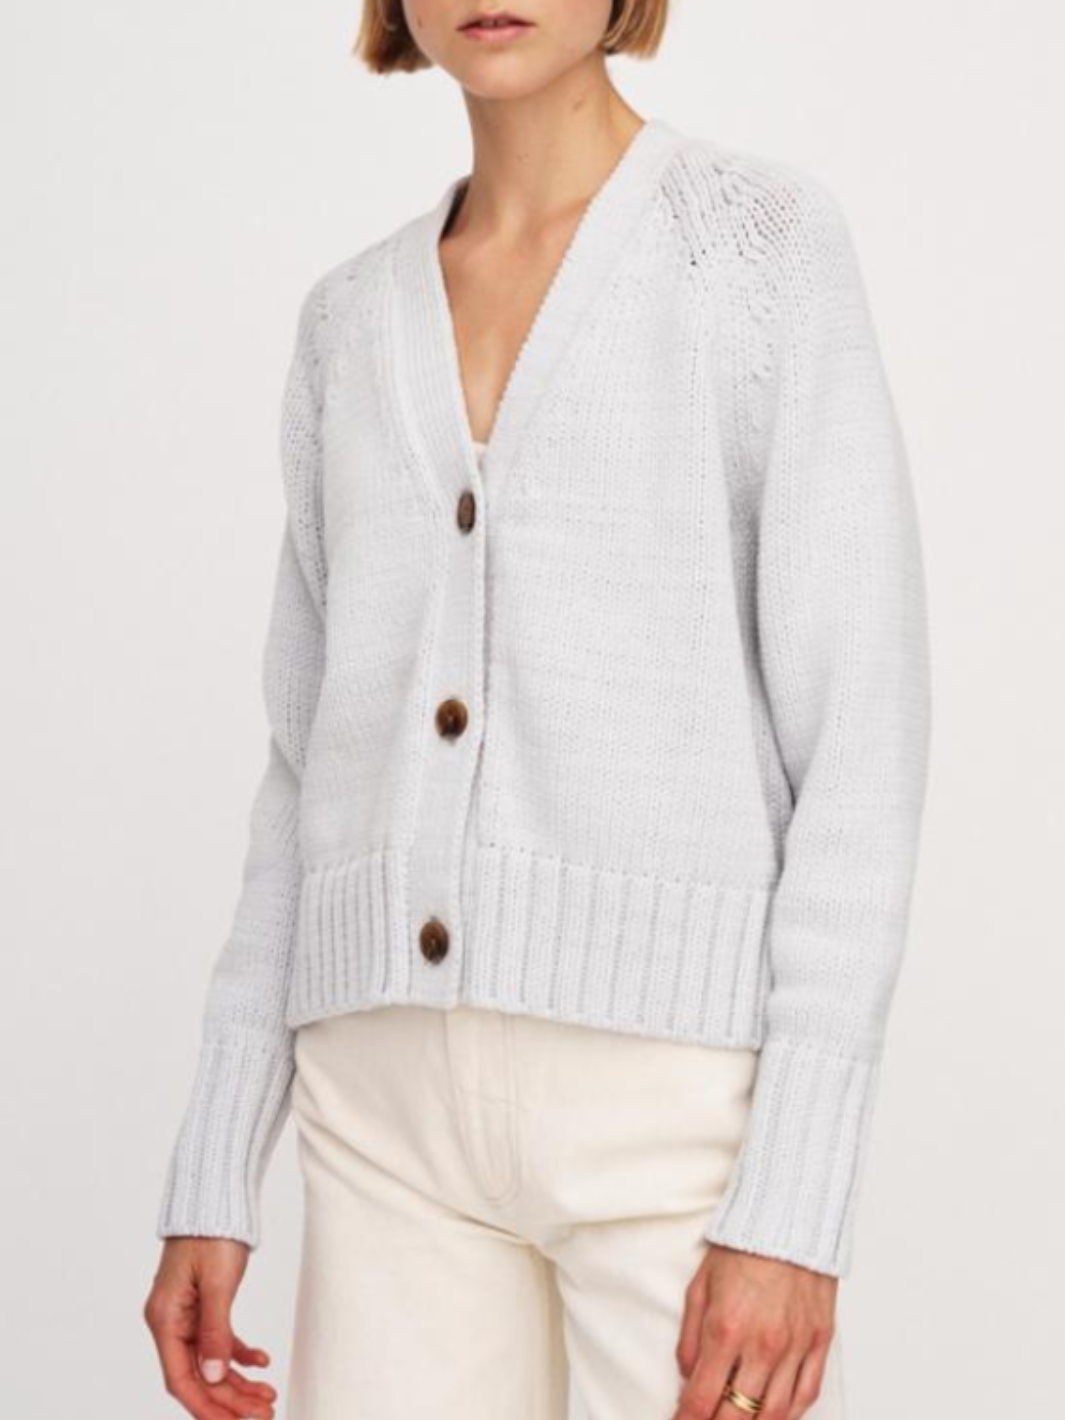 COTTON ROPE BUTTON CARDIGAN IN PALE GREY CORD - Romi Boutique